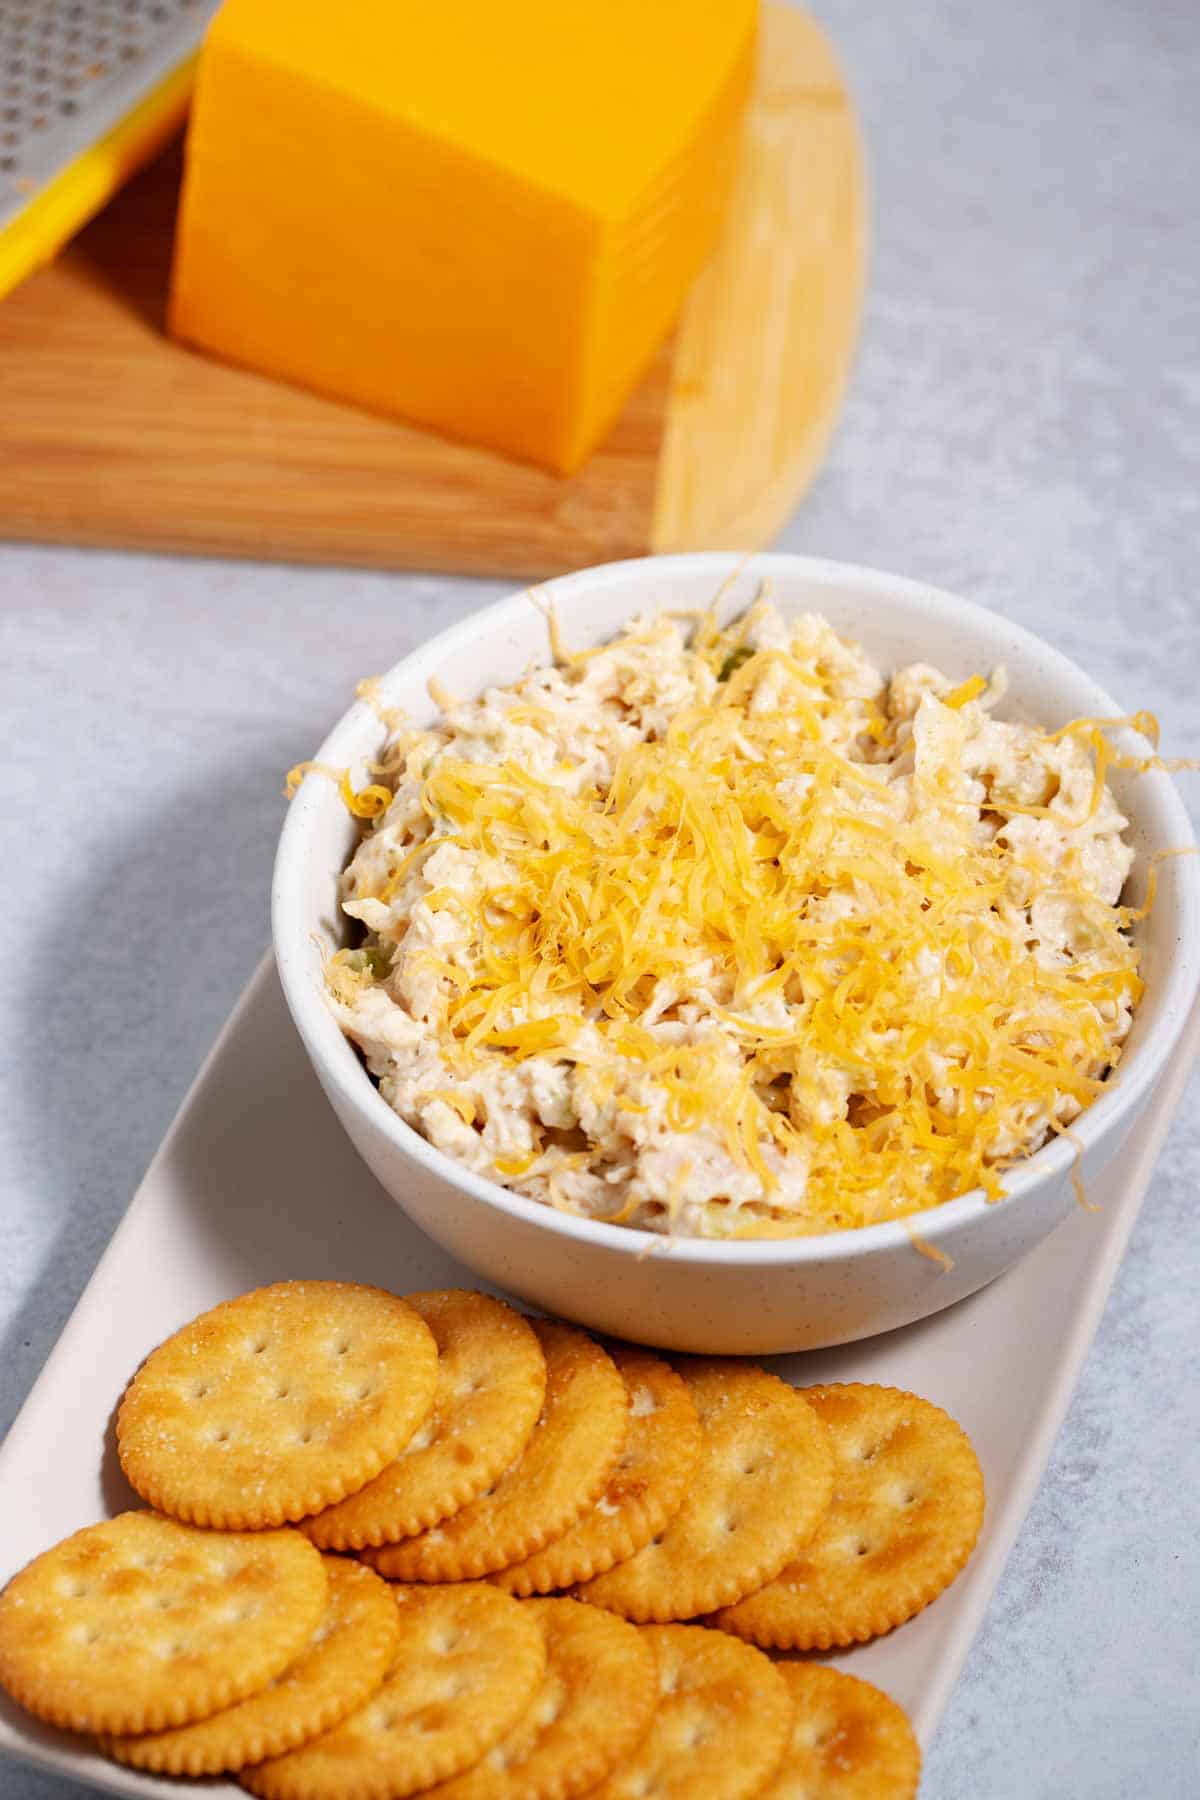 Shredded cheese added to store-bought chicken salad to make it better.